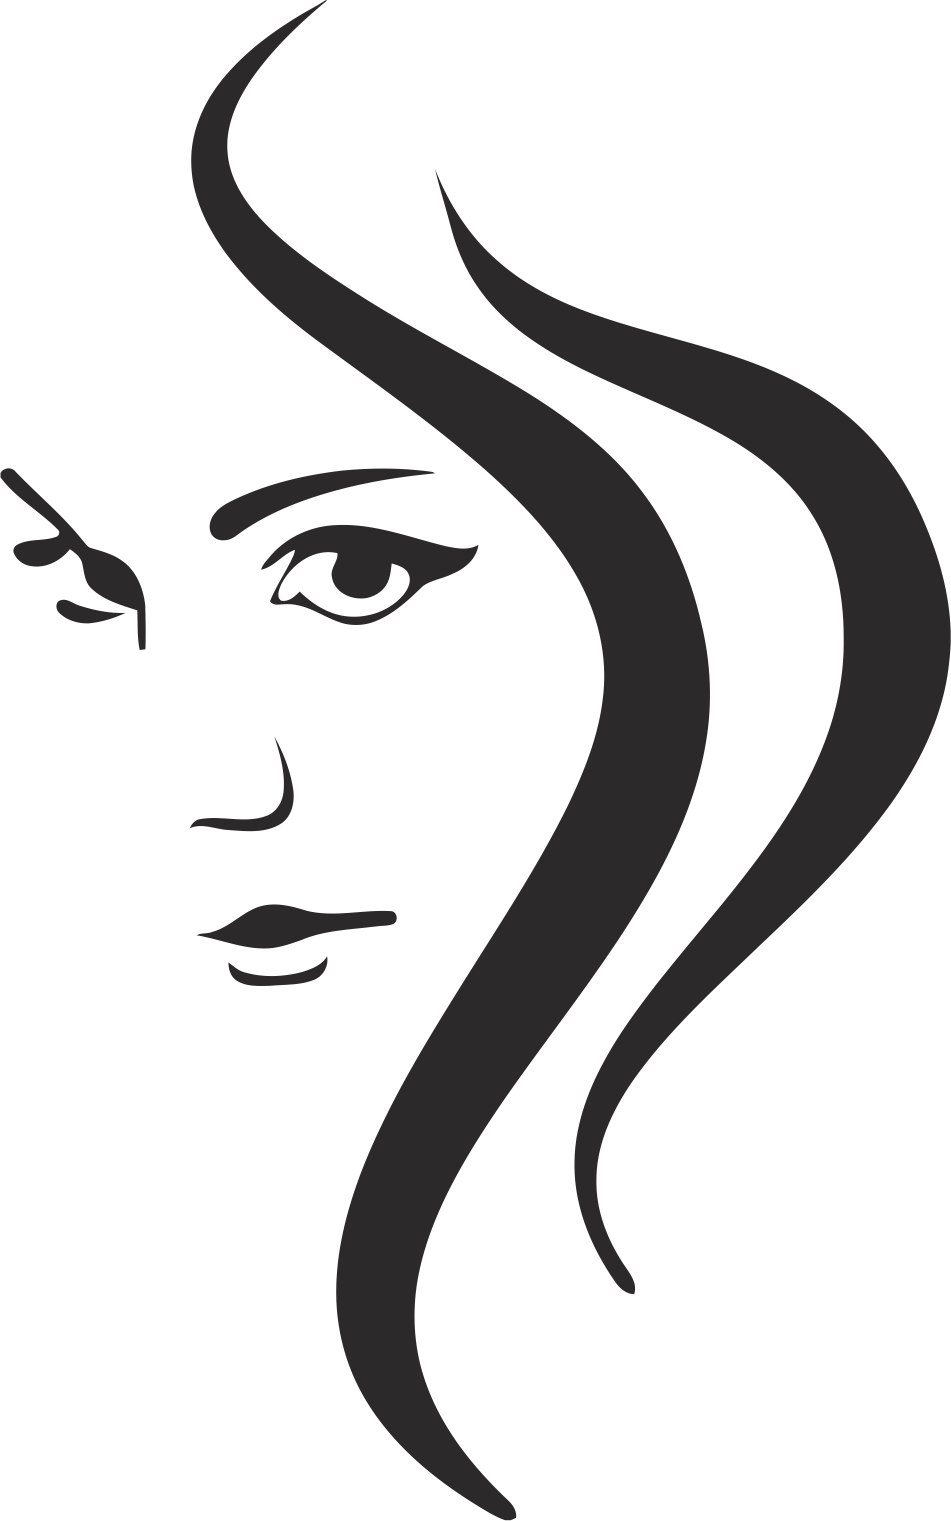 woman-silhouette-free-vector-cdr-download-3axis-co